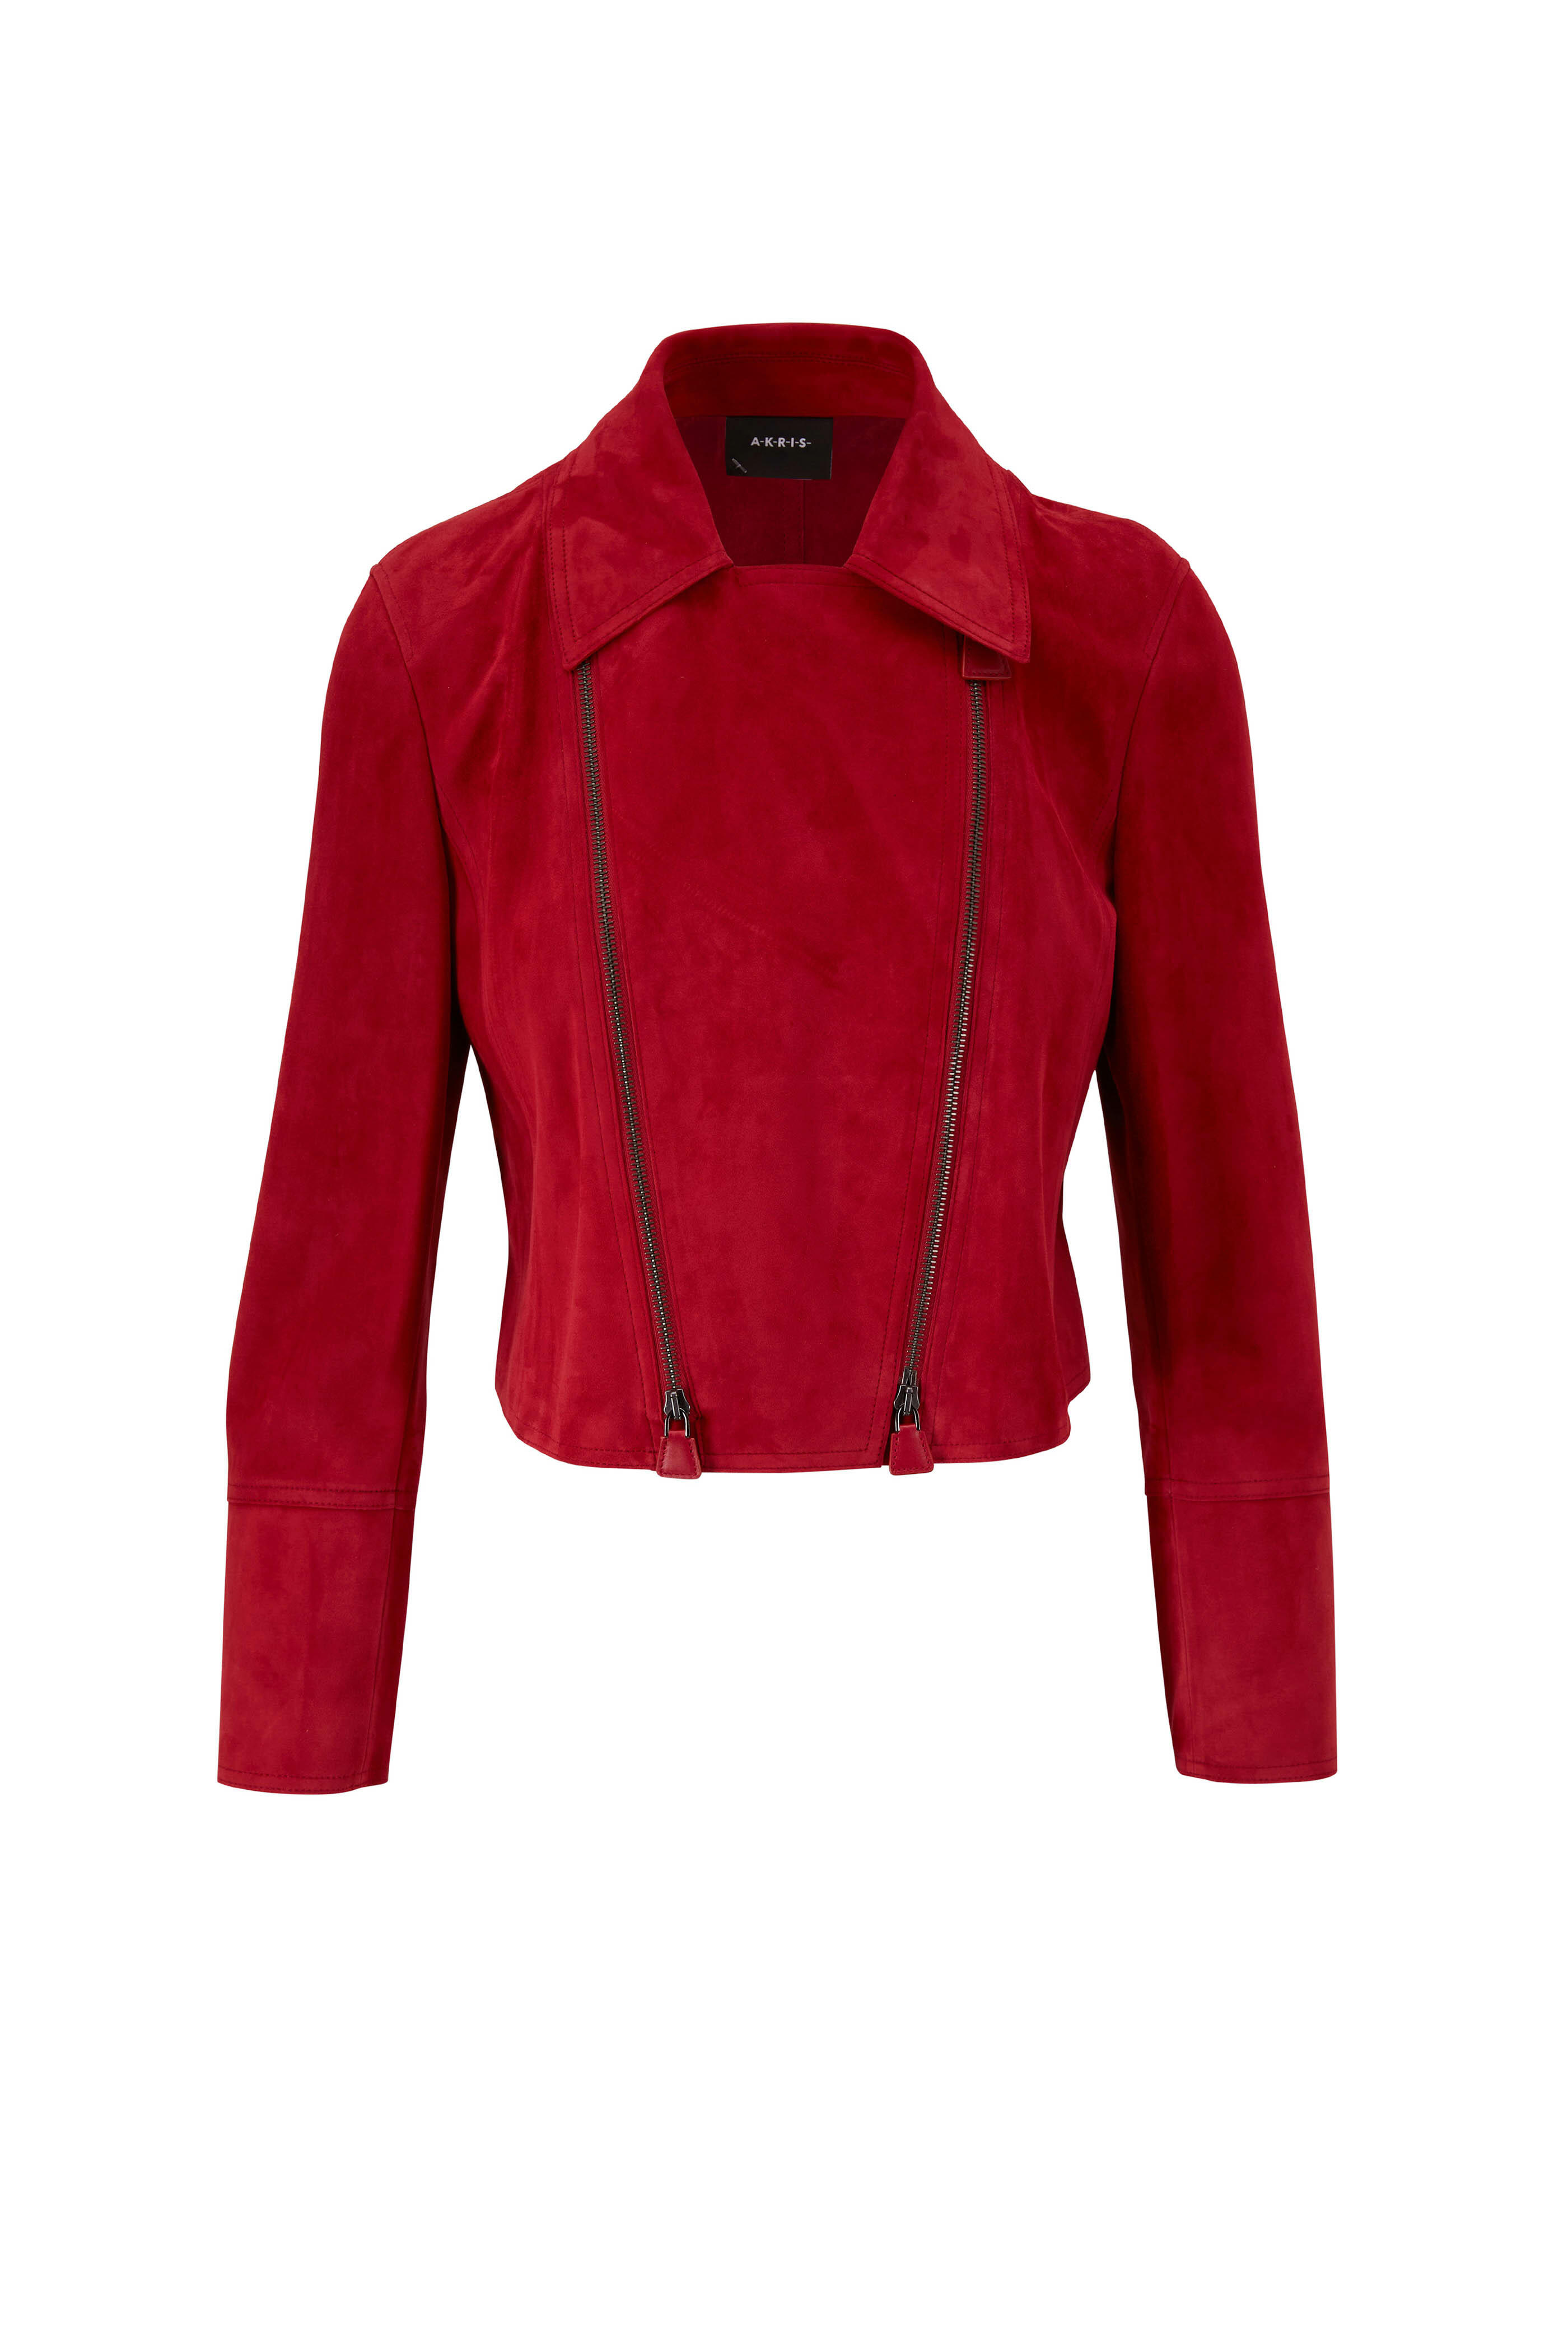 Akris - Clary Red Suede Short Moto